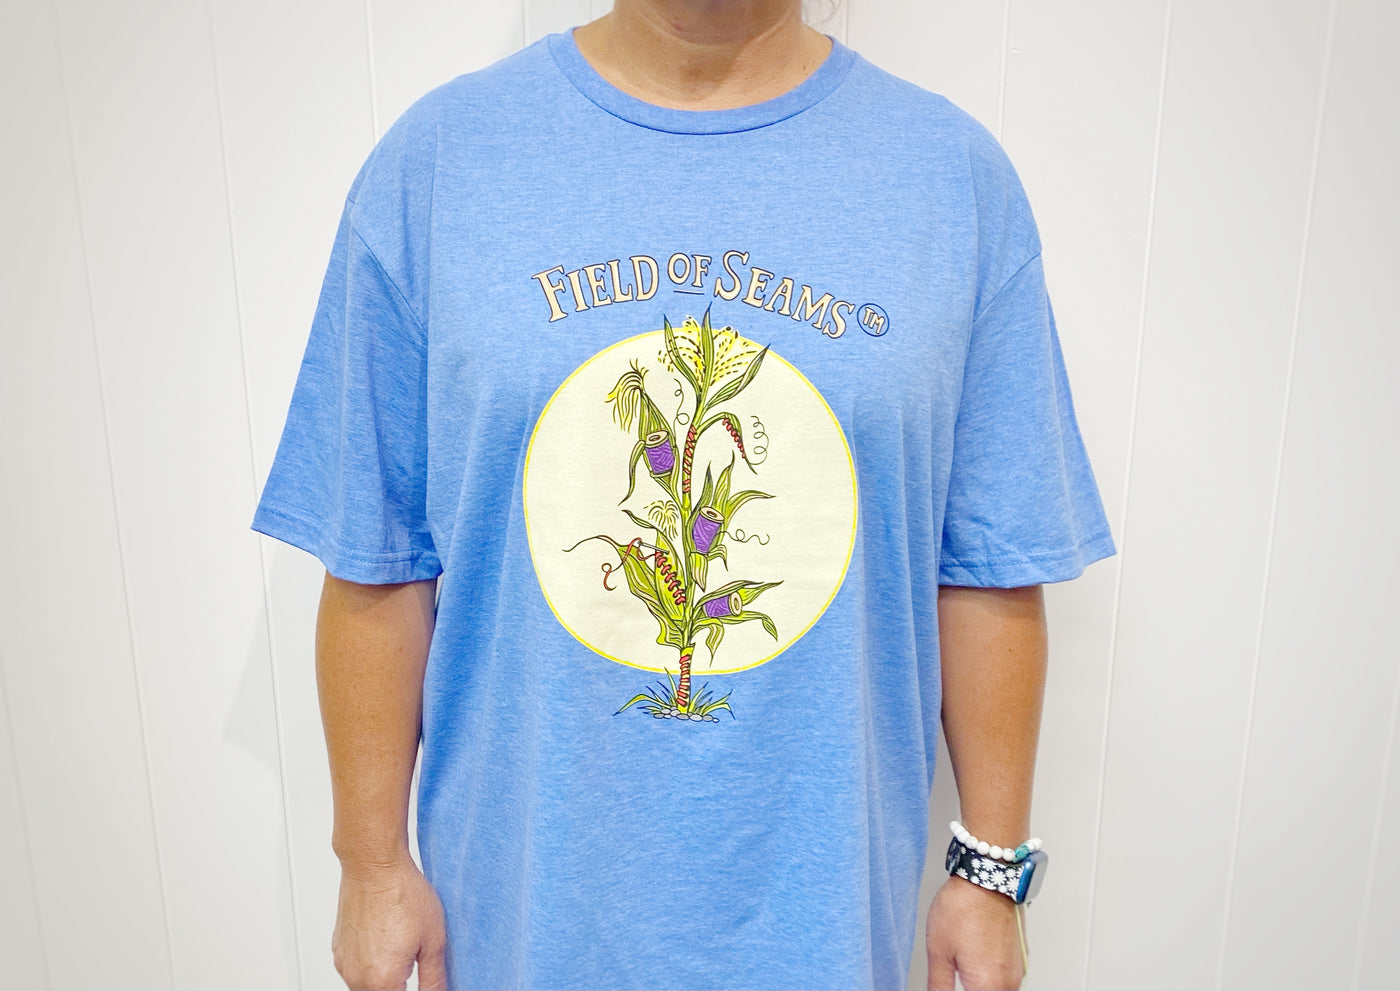 Field of Dreams - This Field T-Shirt